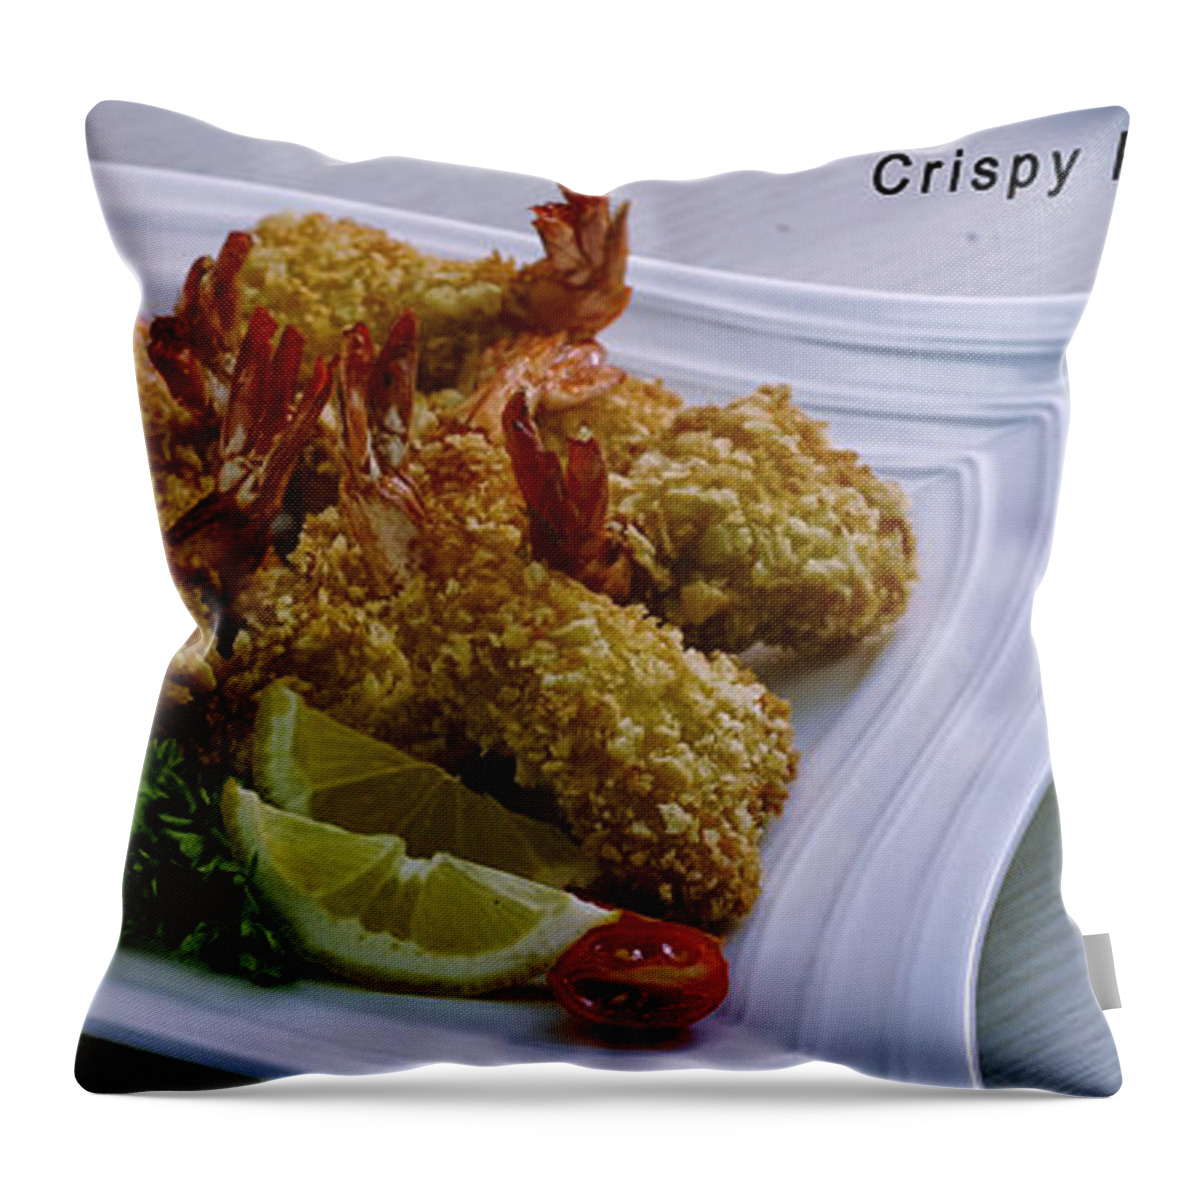 Prawns Throw Pillow featuring the photograph Crispy Prawns with Recipe by Charuhas Images